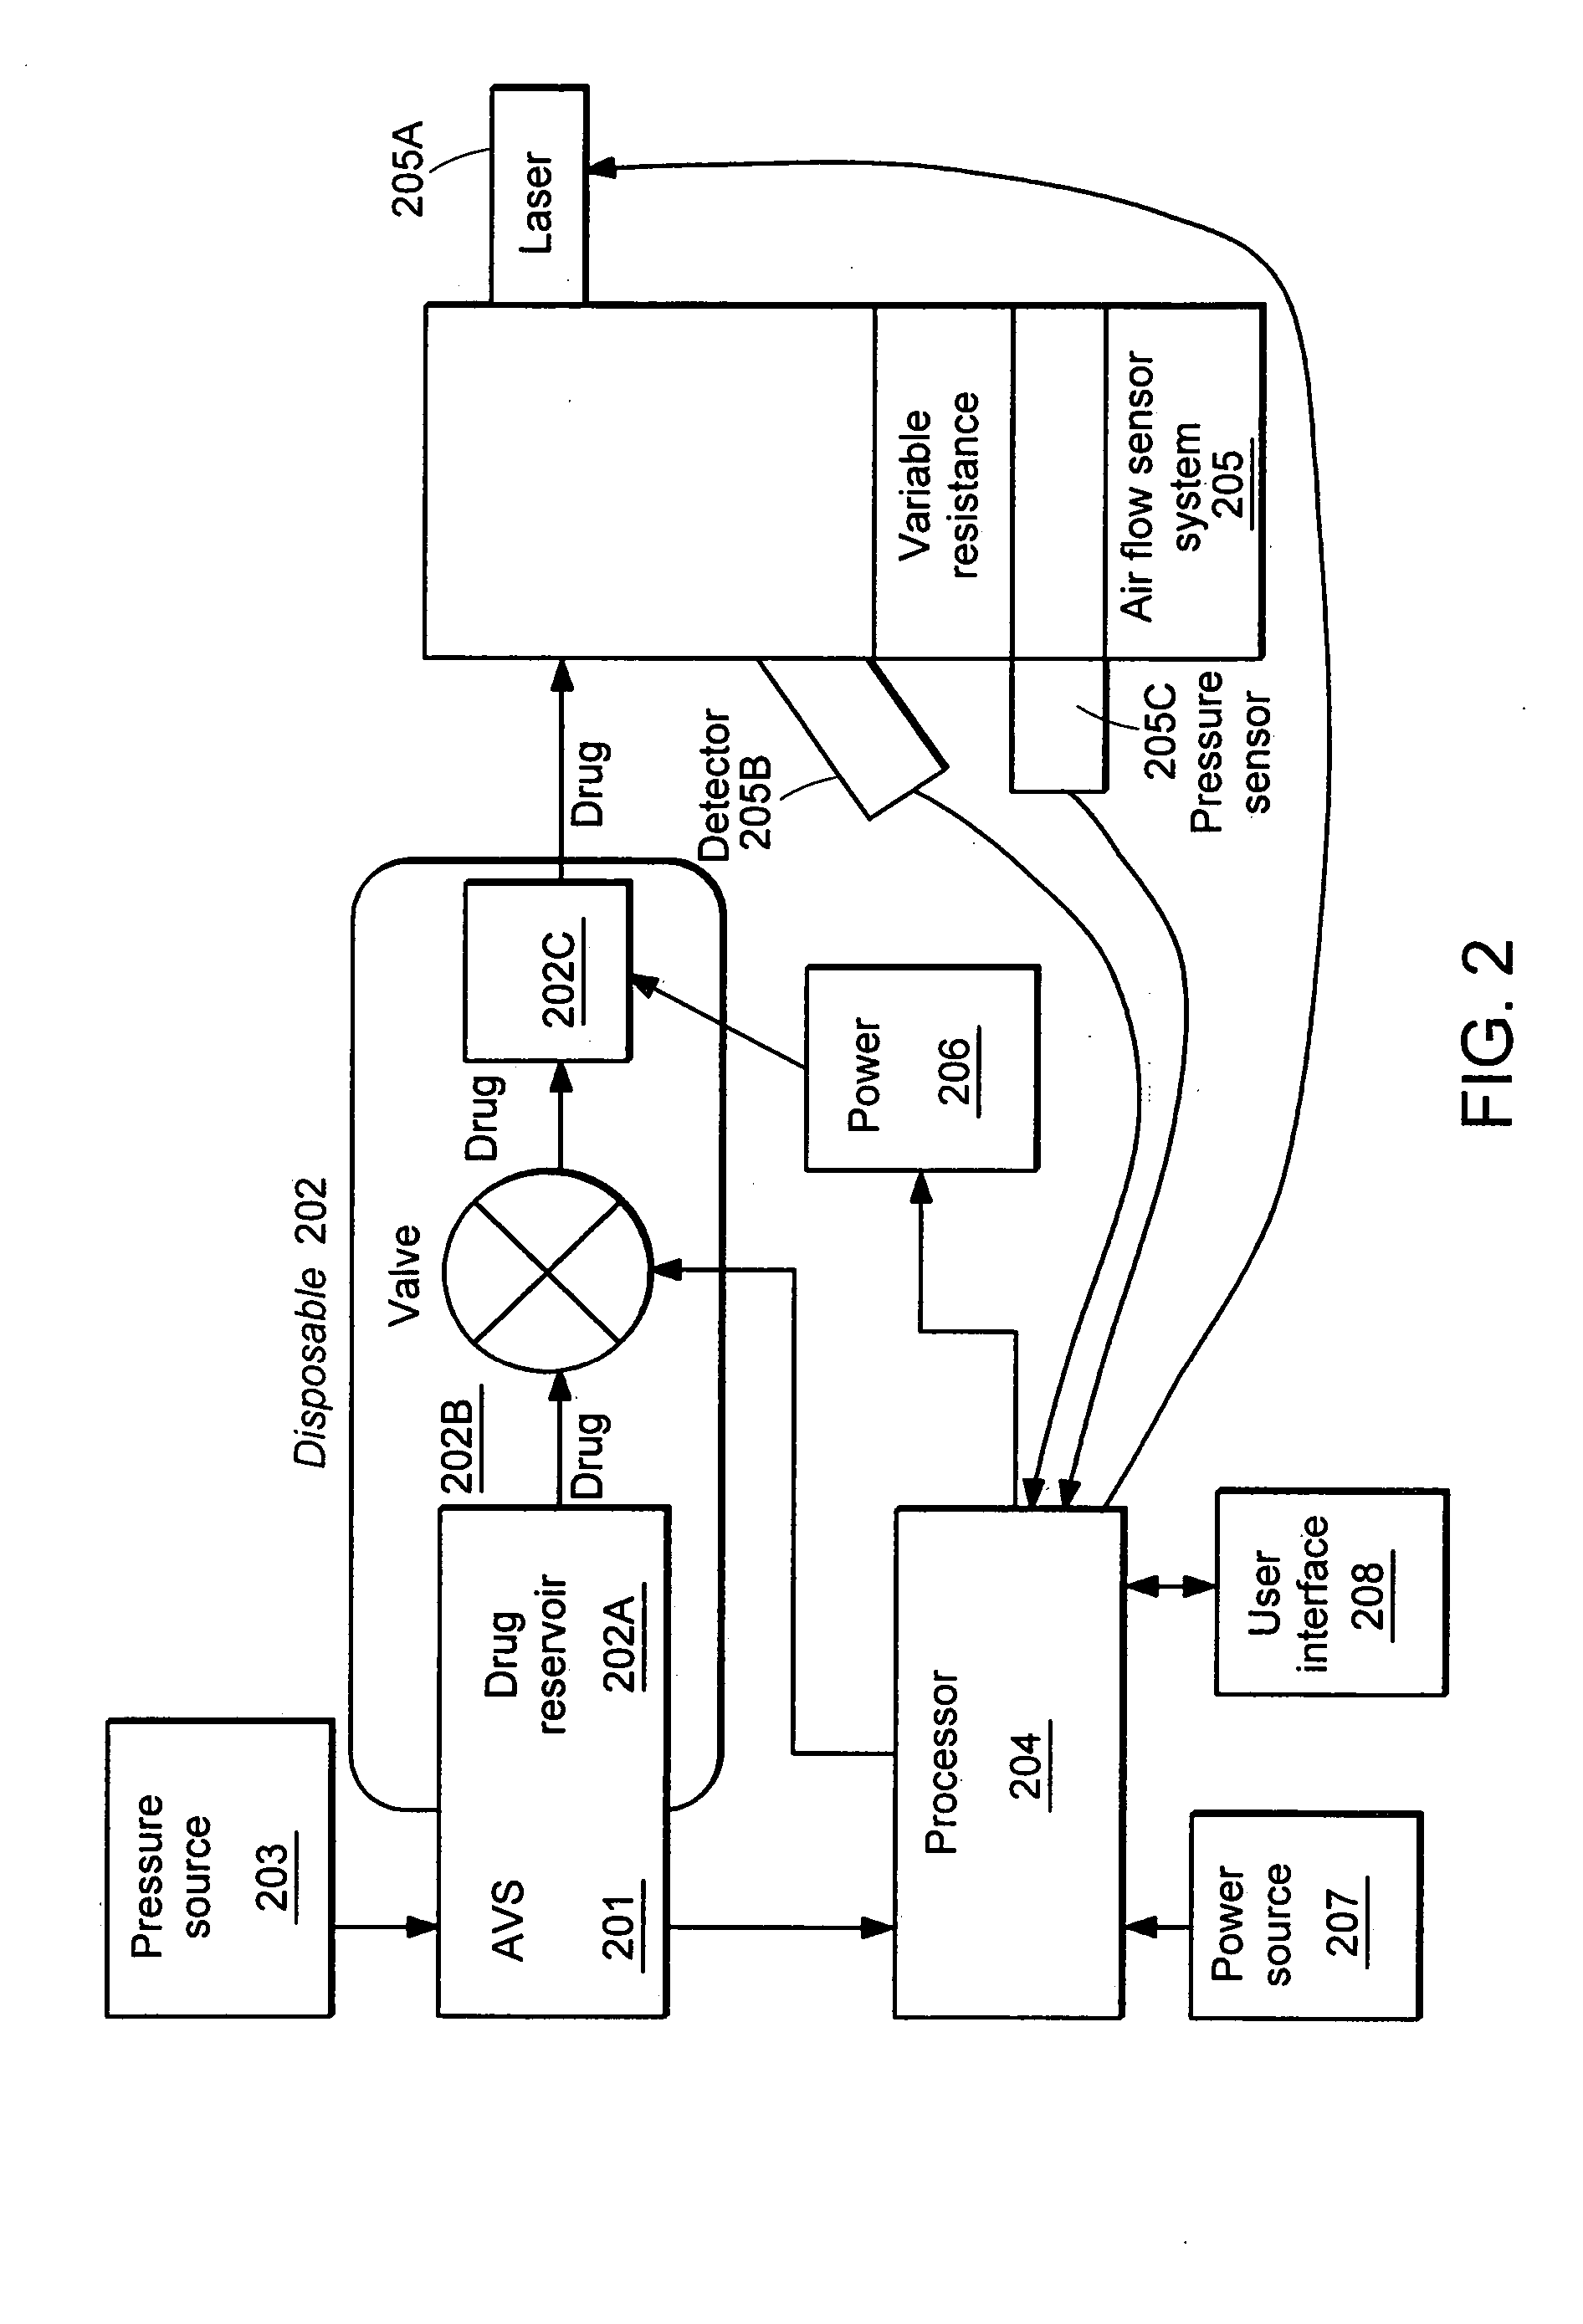 System and method for improved volume measurement